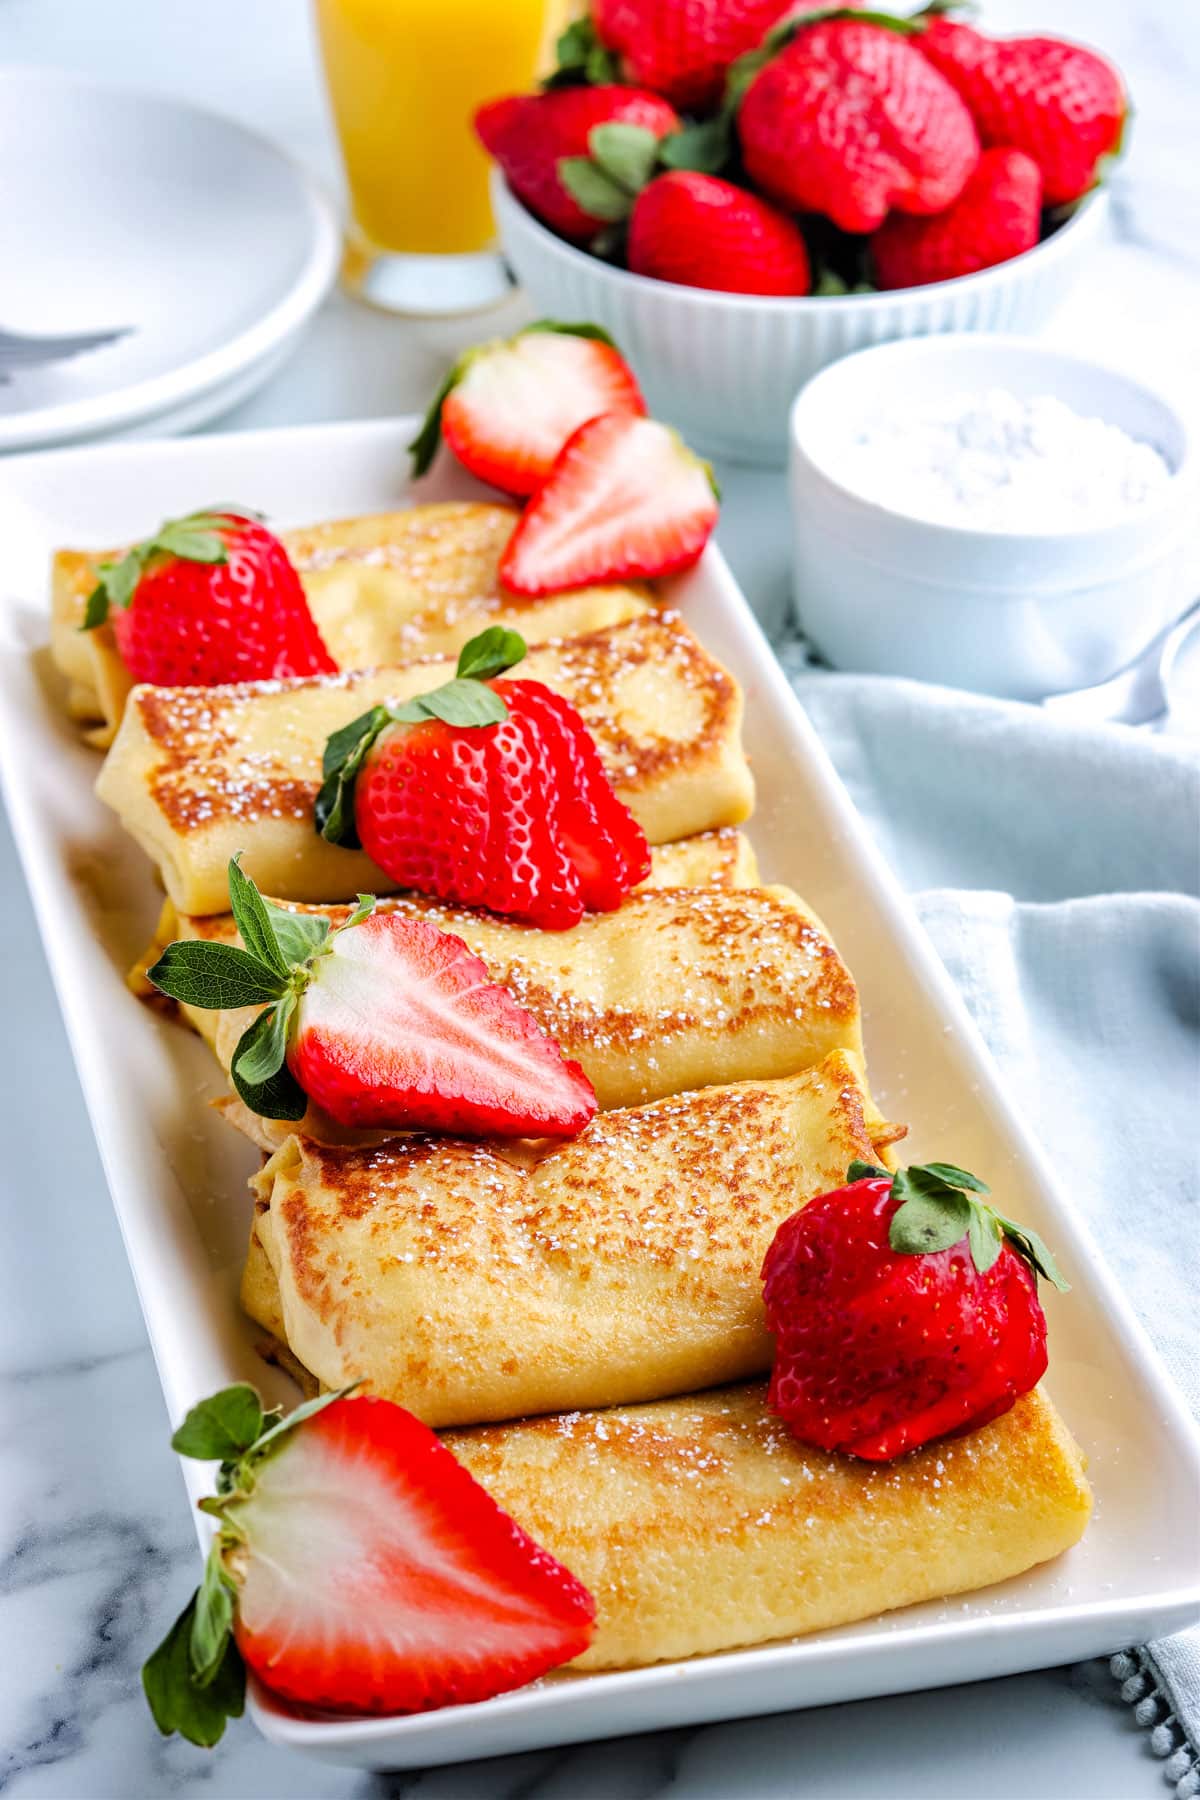 A picture of the finished blintzes on a serving dish with strawberries as a garnish.